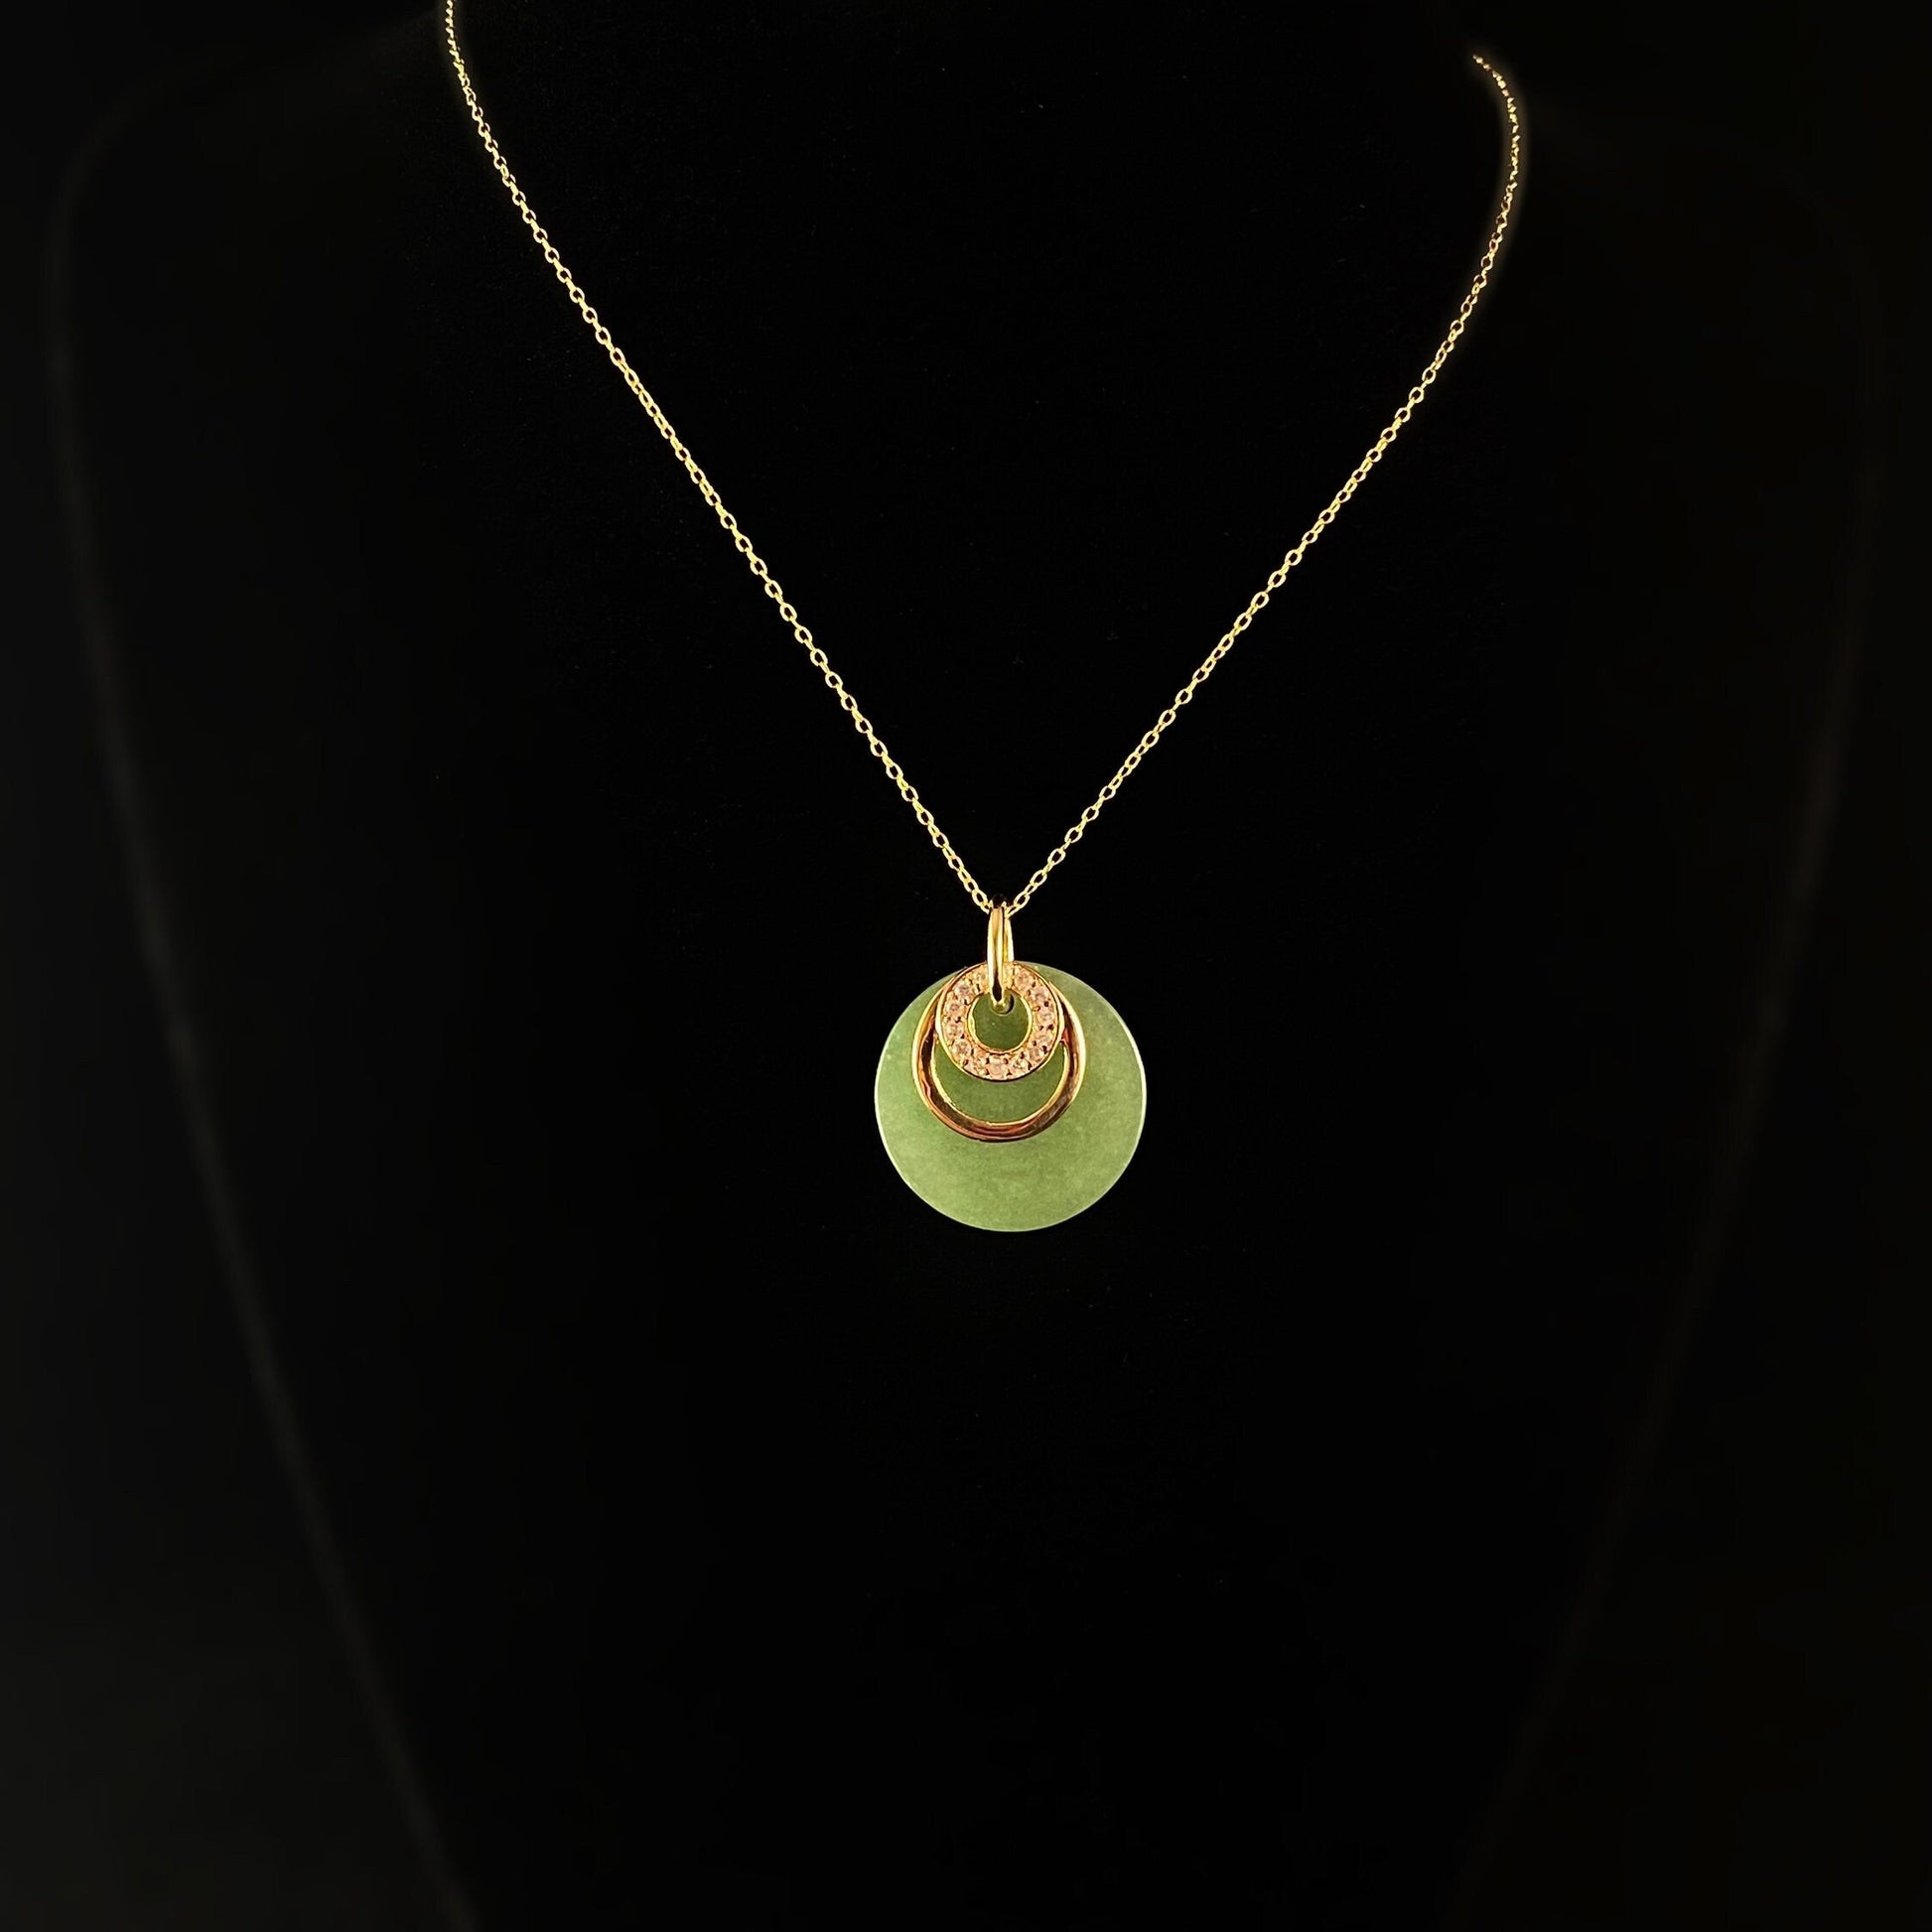 Elegant Dainty Gold Necklace with Round Jade Pendant and Gold Discs- Genevive